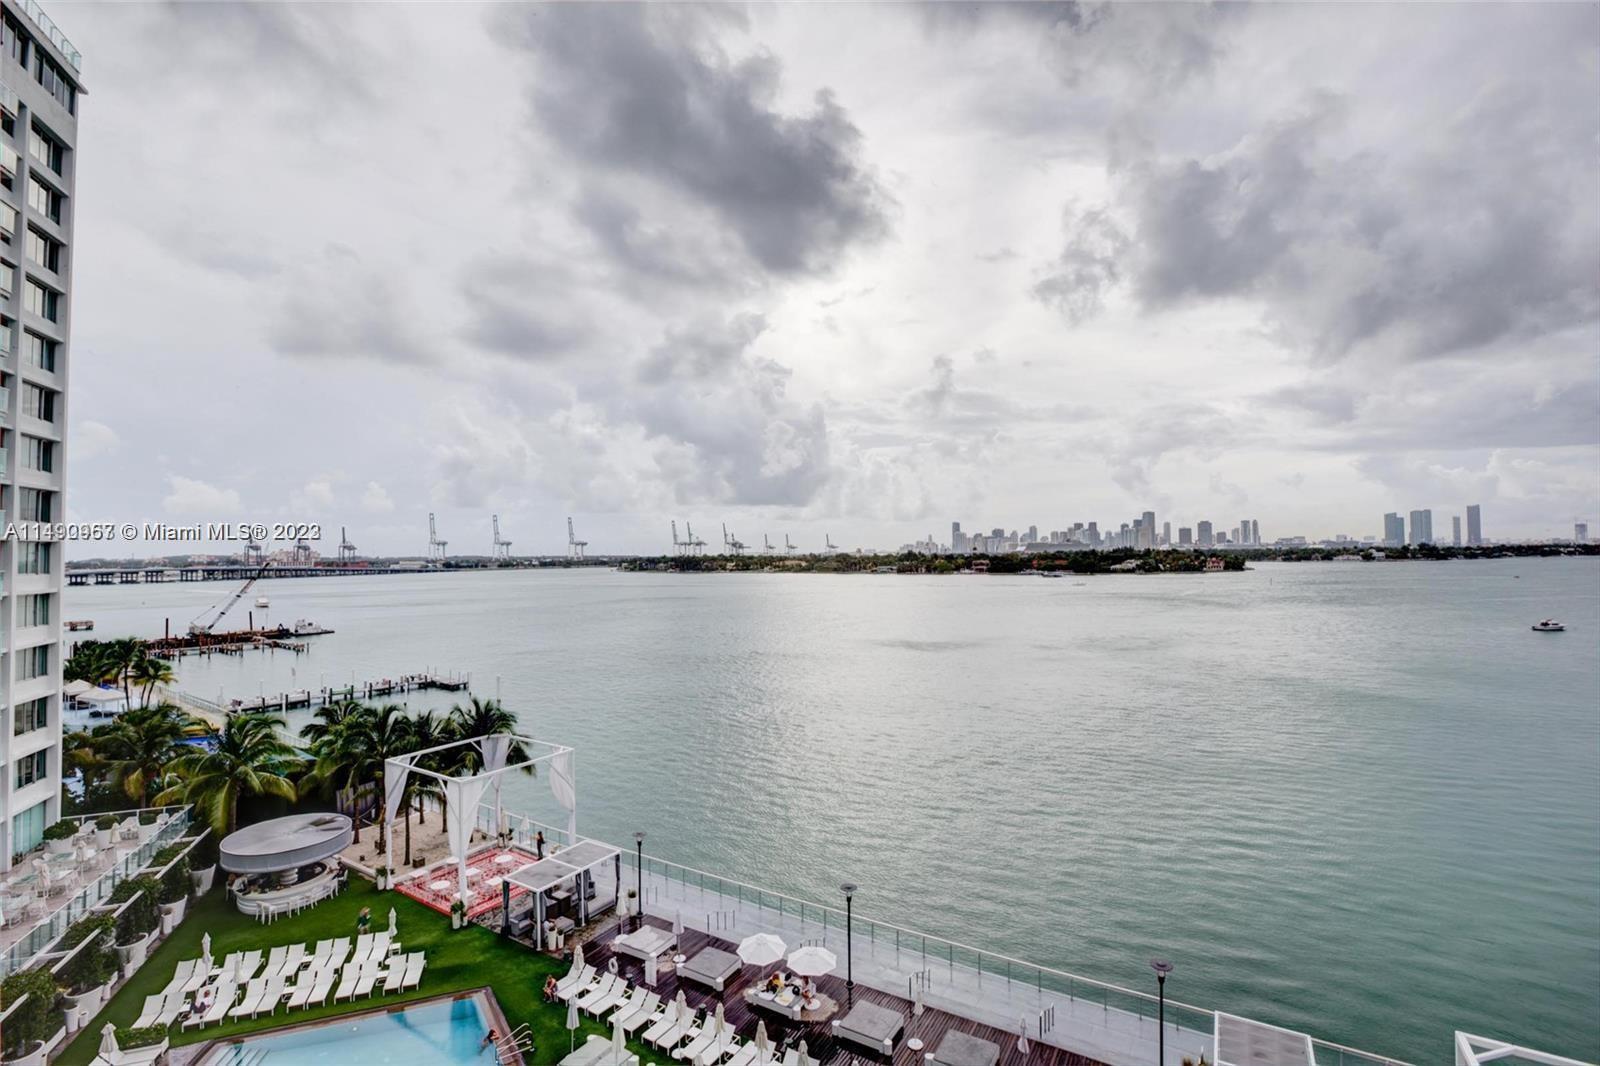 1100 West Ave 425, Miami Beach, Florida 33139, 1 Room Rooms,1 BathroomBathrooms,Residential,For Sale,1100 West Ave 425,A11490967